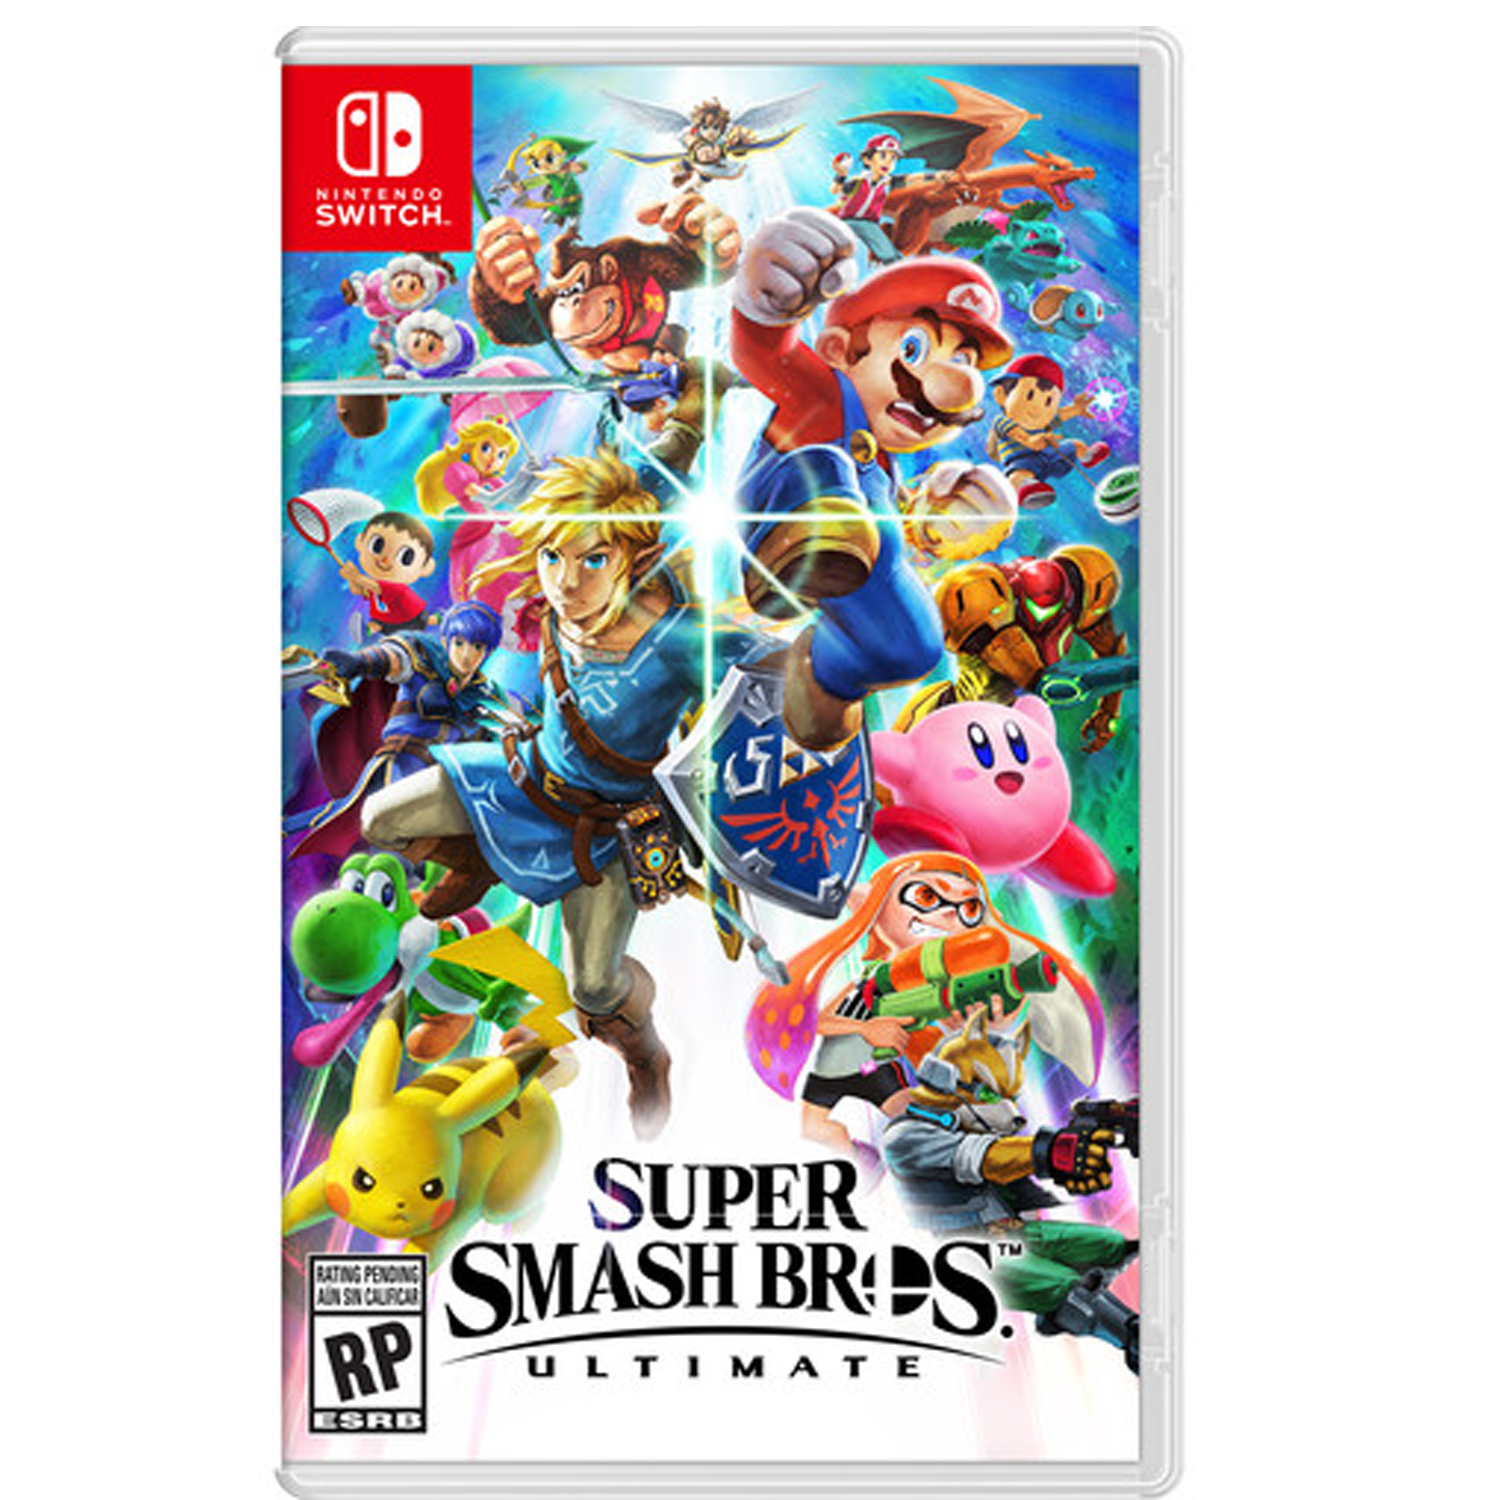 Monster Hunter Rise And Super Smash Bros Ultimate 2 Games For 